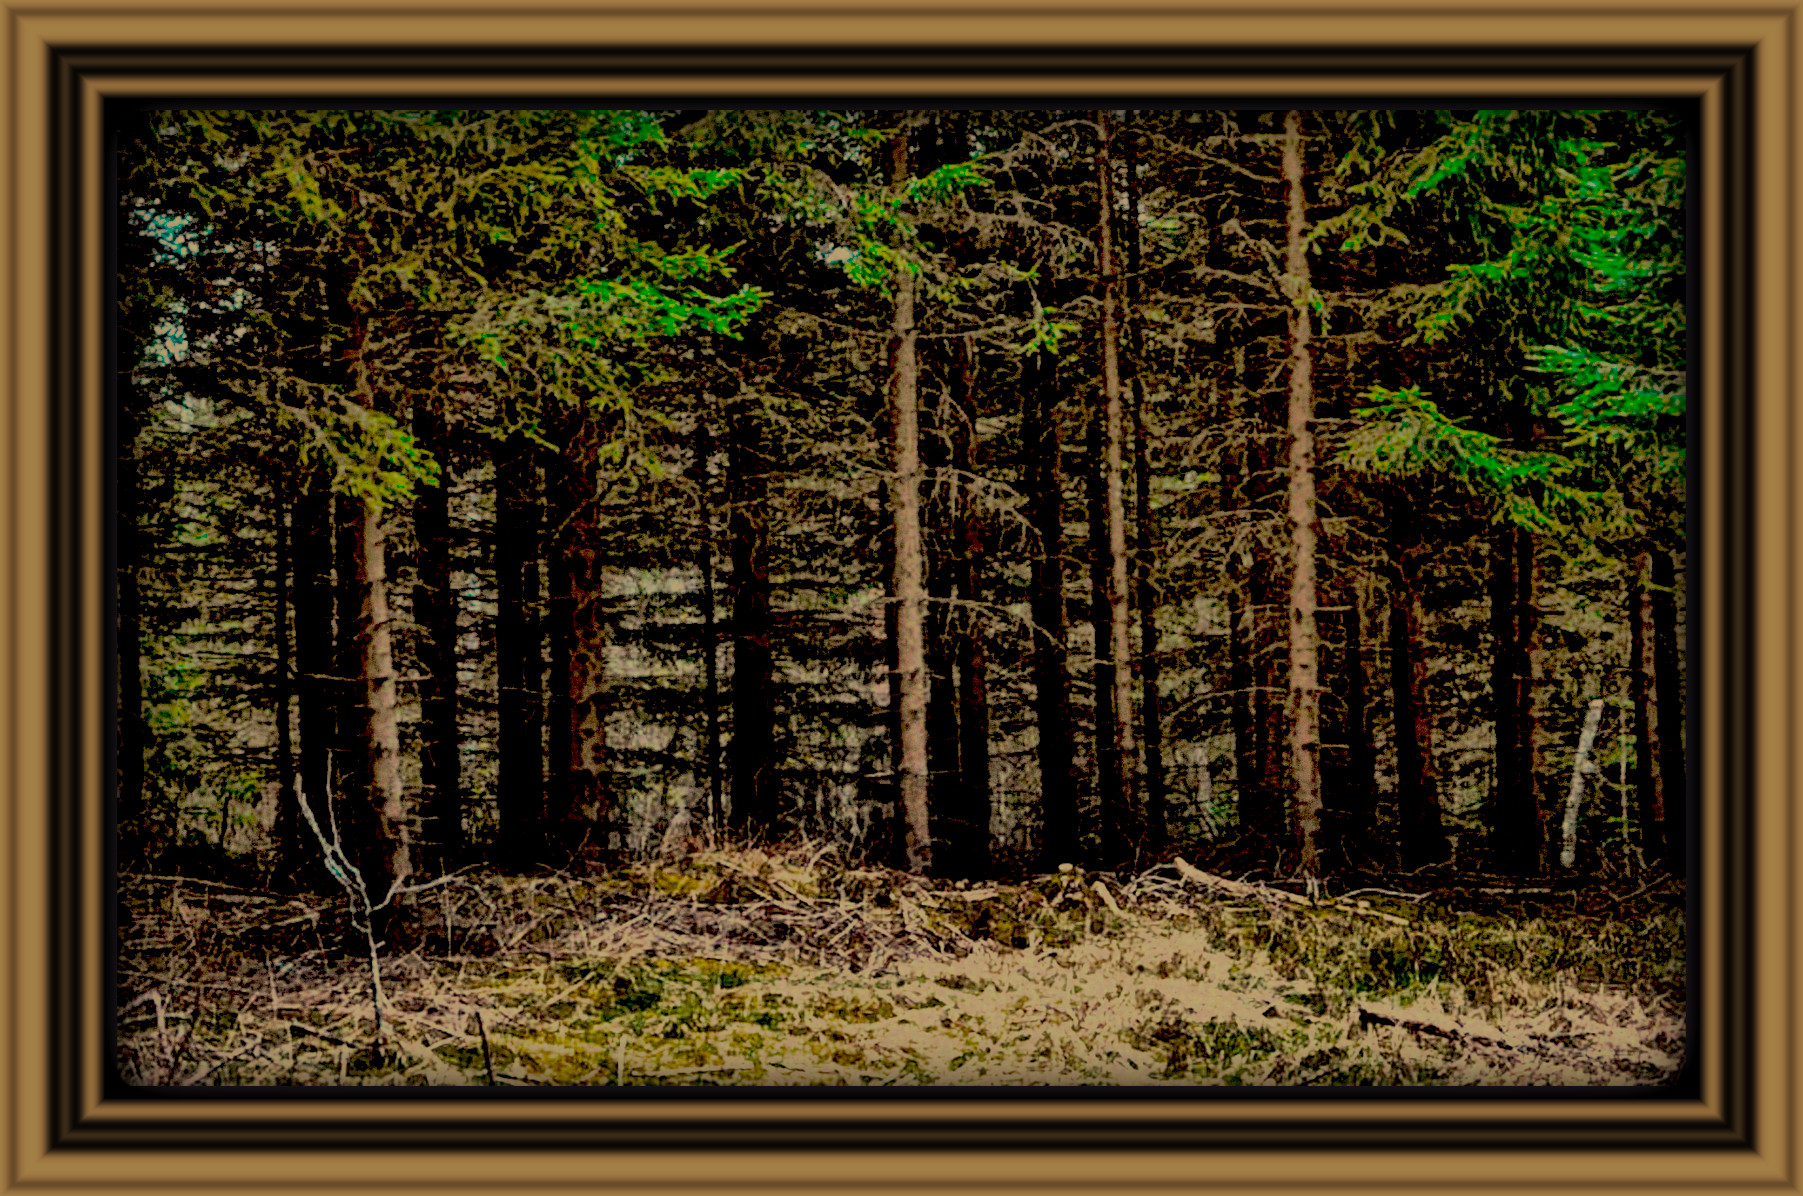 2024-03-28 09-50-07 deep_in_the_forest_by_ravenslane_d65kmhg-414w-2x with Lines Art effect, preset=3000,35.0,3.5,Pen Drawing,1,[136,106,54],0,1.jpg